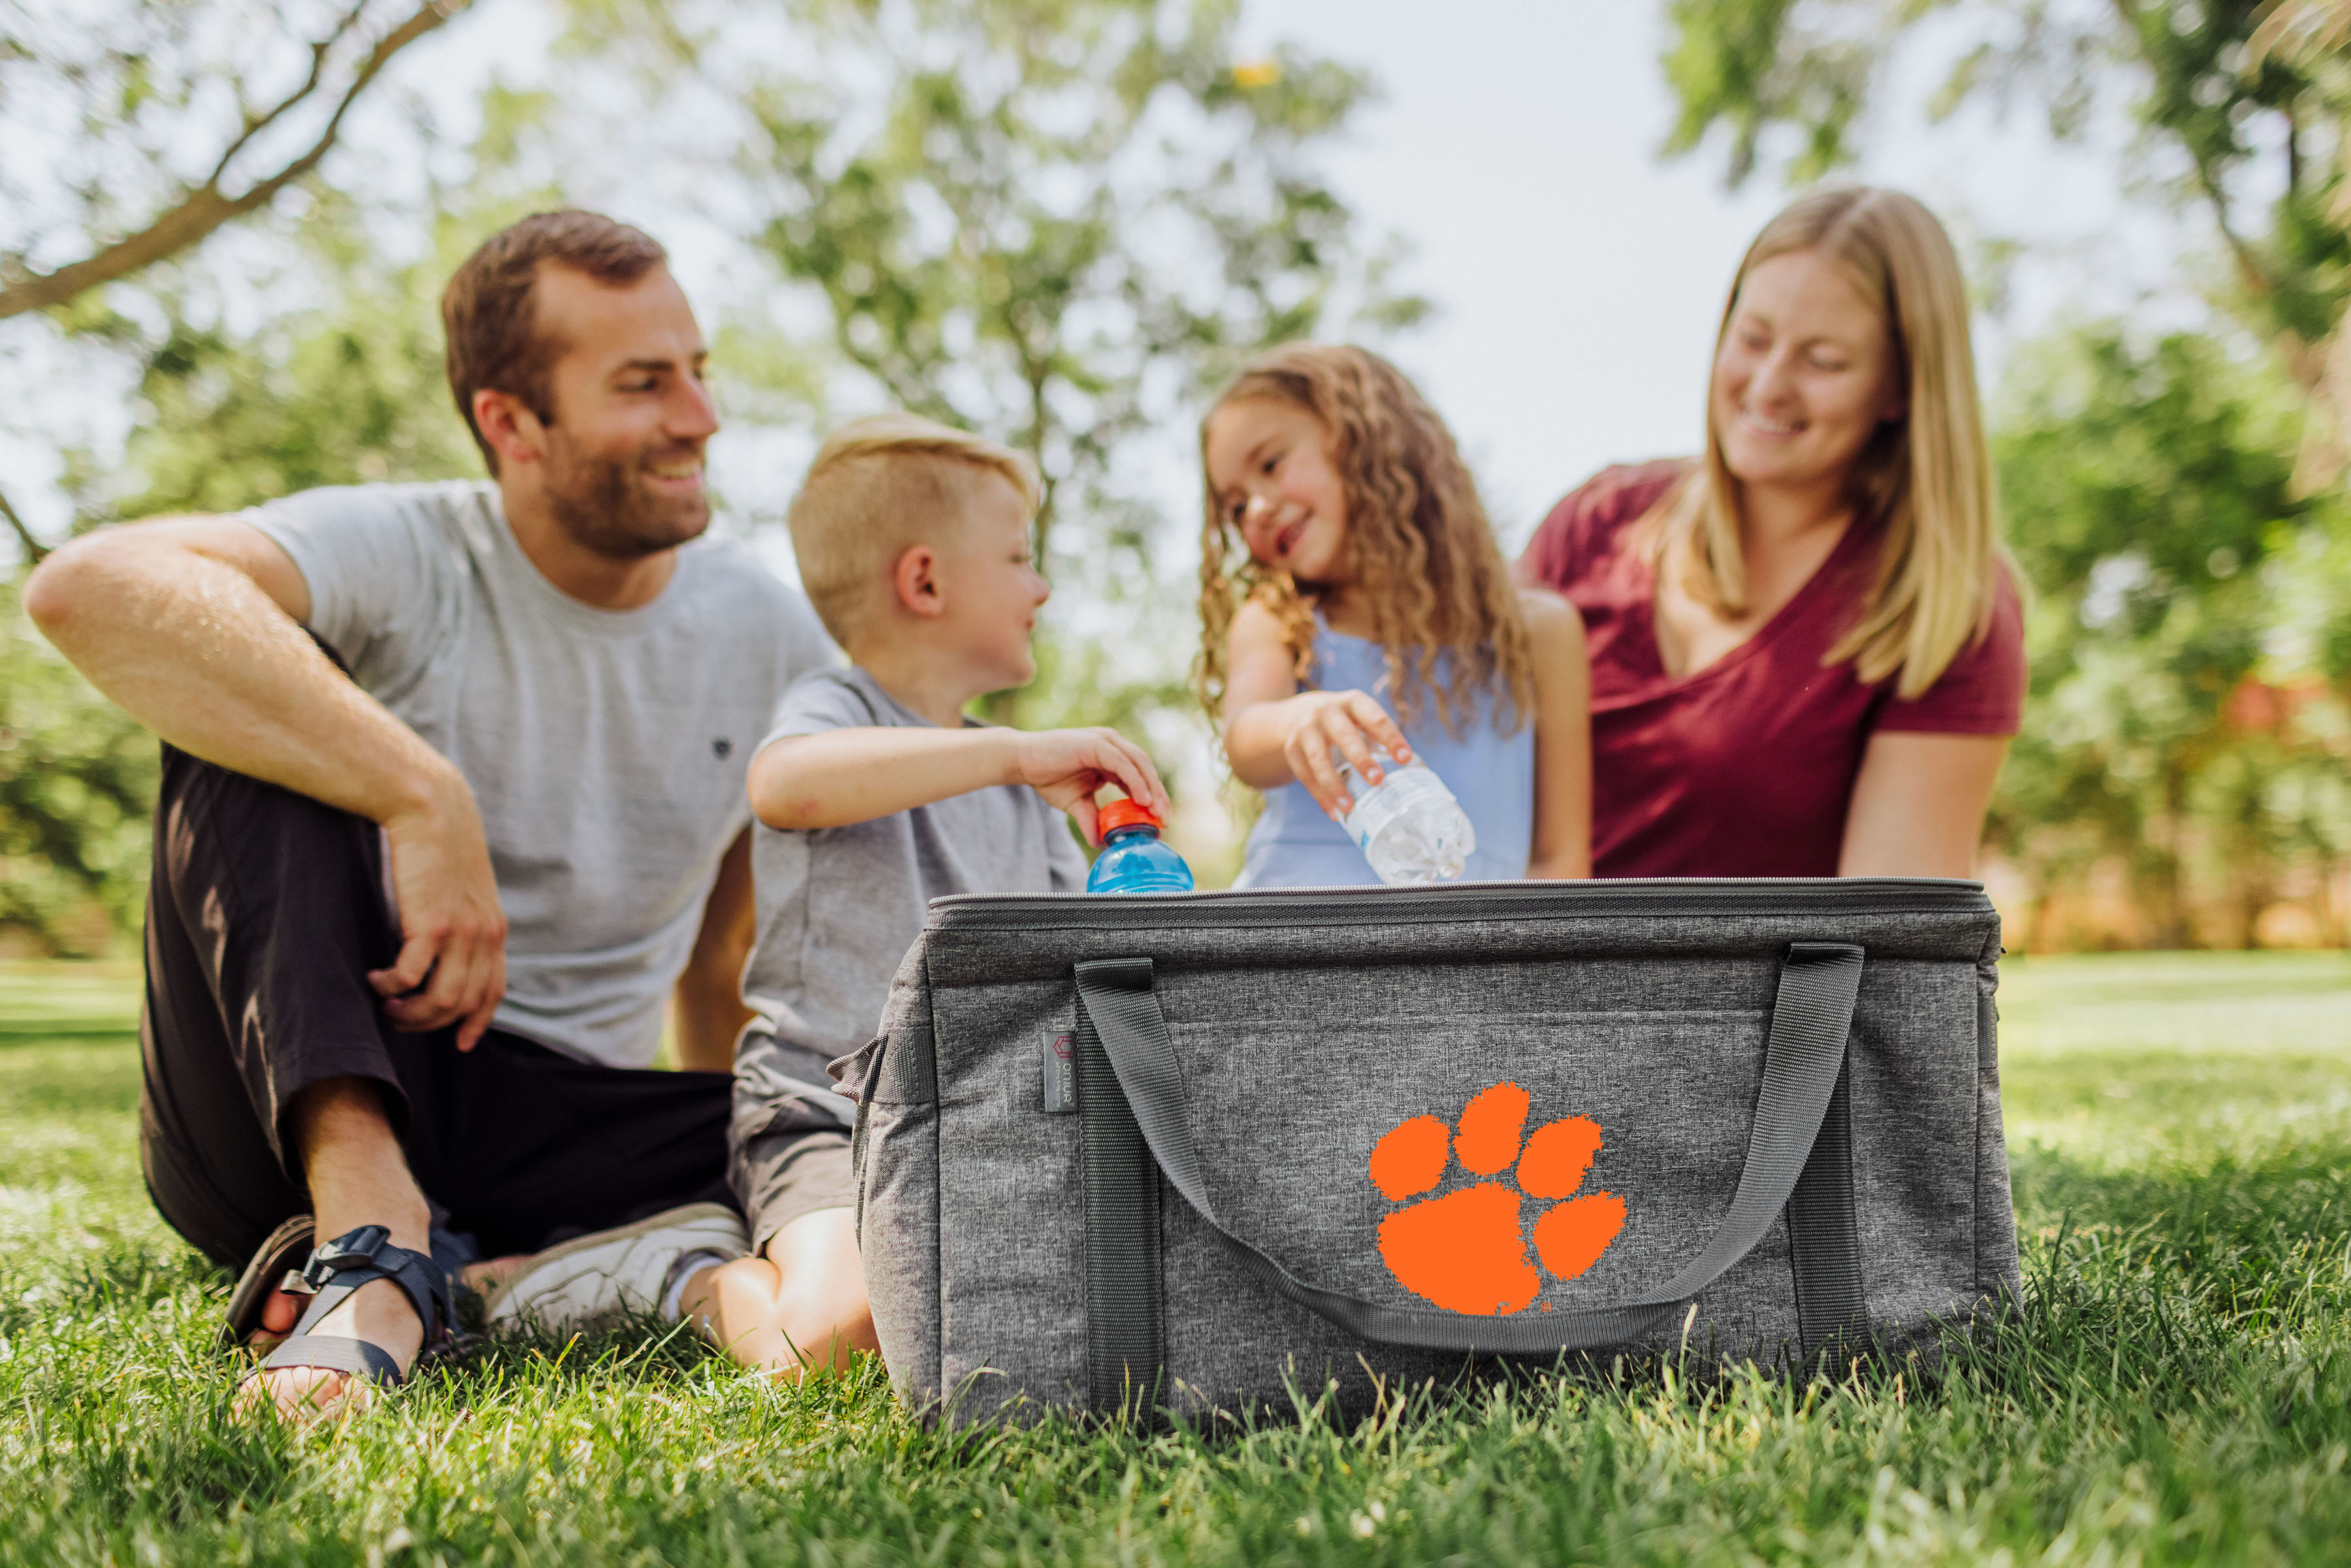 Clemson Tigers - 64 Can Collapsible Cooler